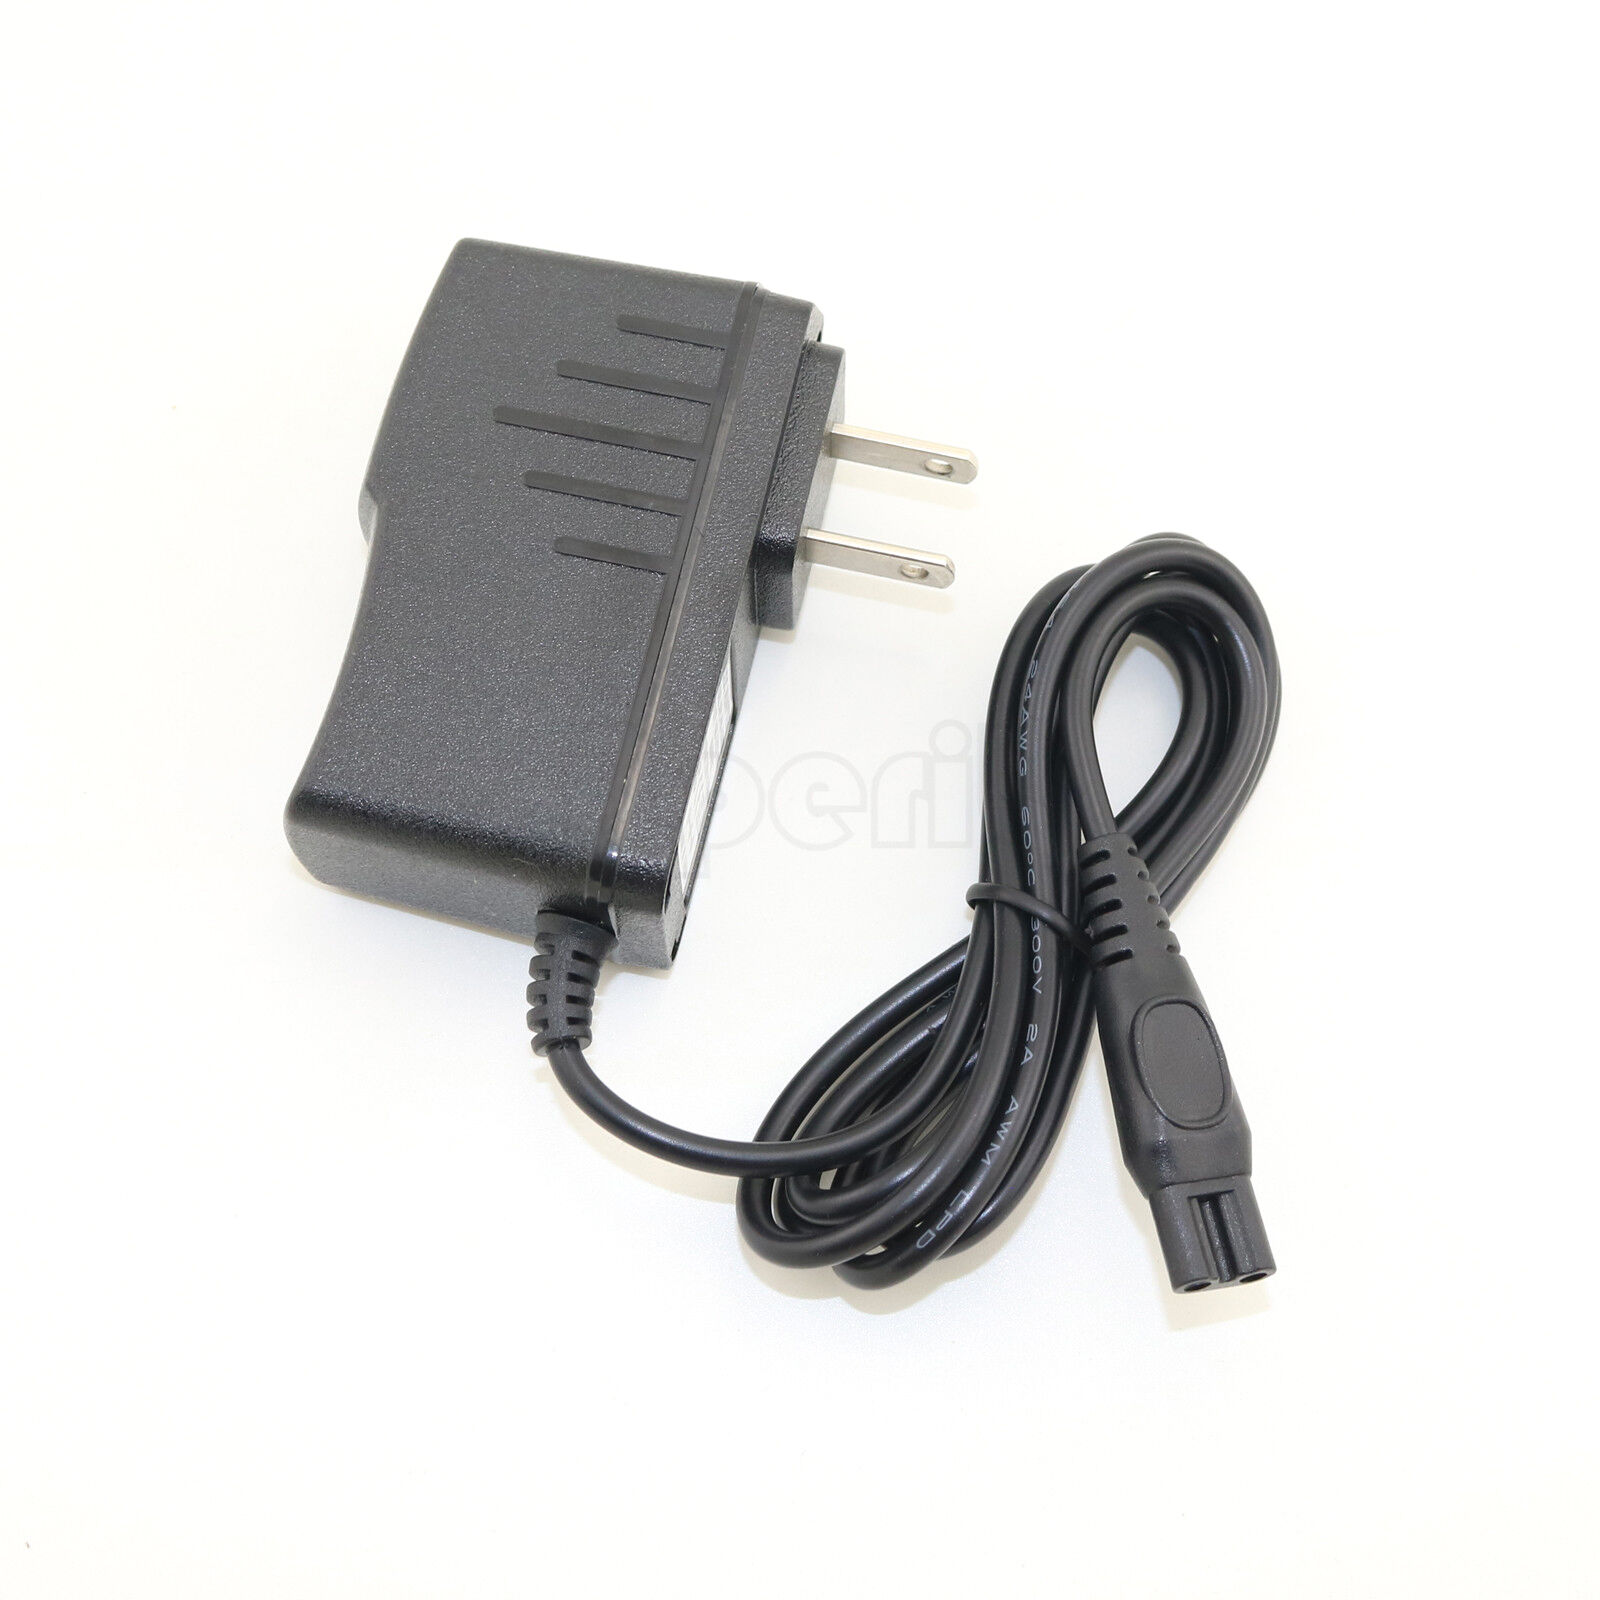 AC/DC Power Adapter Charger For Philips Norelco Multigroom Series 3100 QG3330 AC/DC Power Adapter Charger For Philips N - Click Image to Close